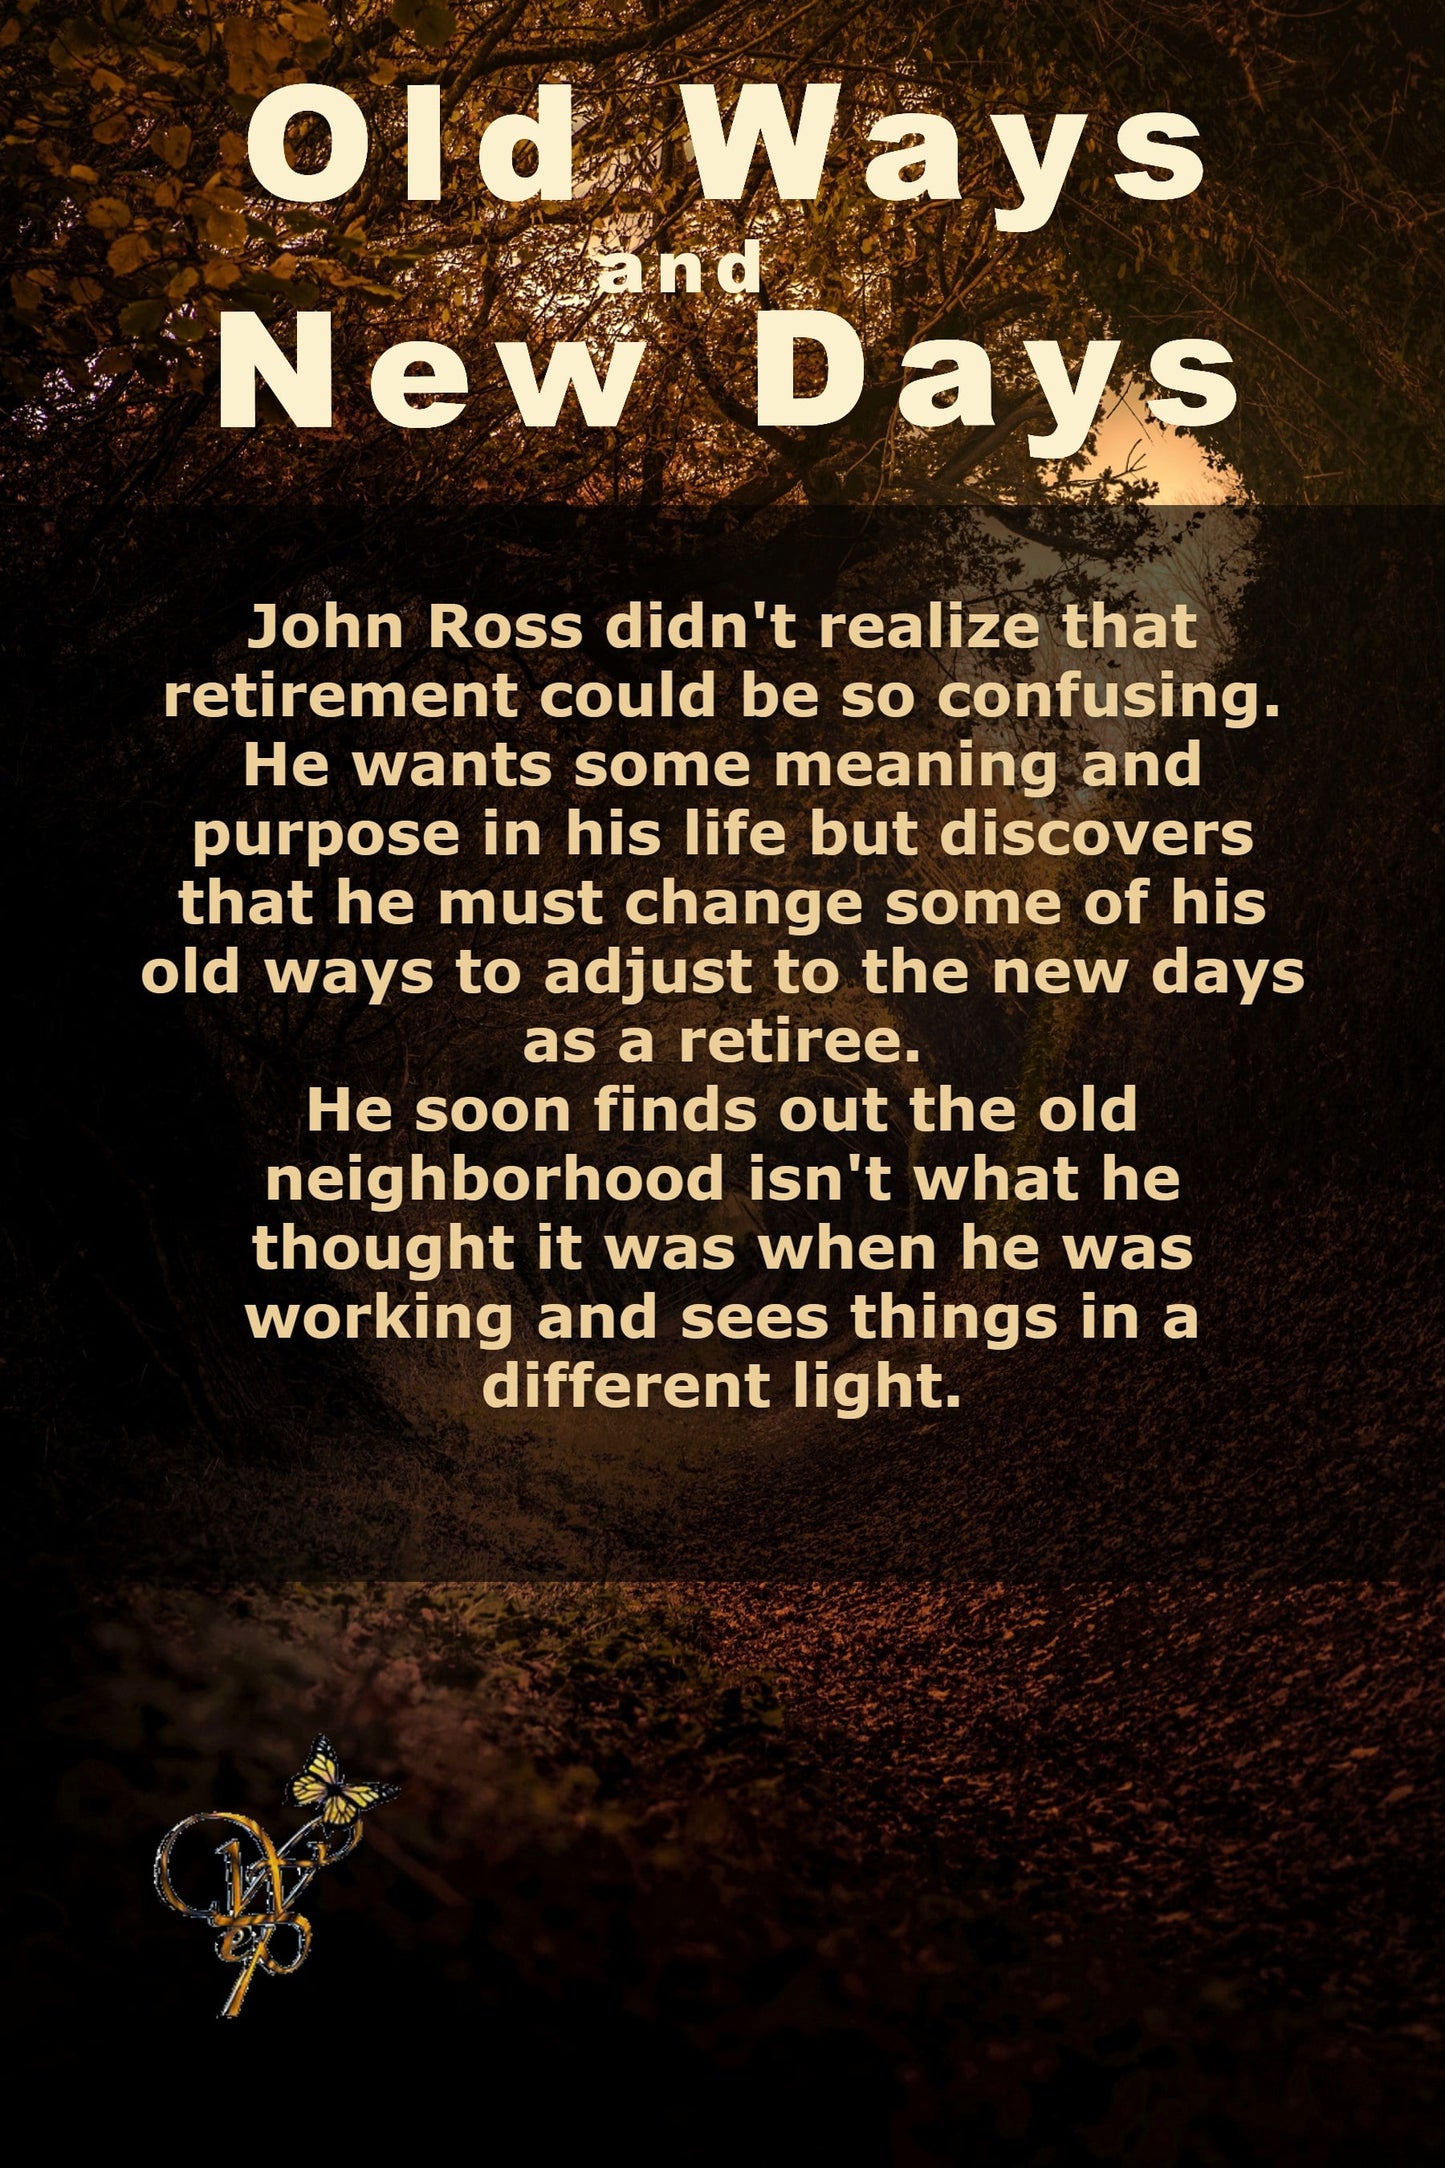 Old Ways and New Days (A John Ross Boomer Lit Series Book 1)